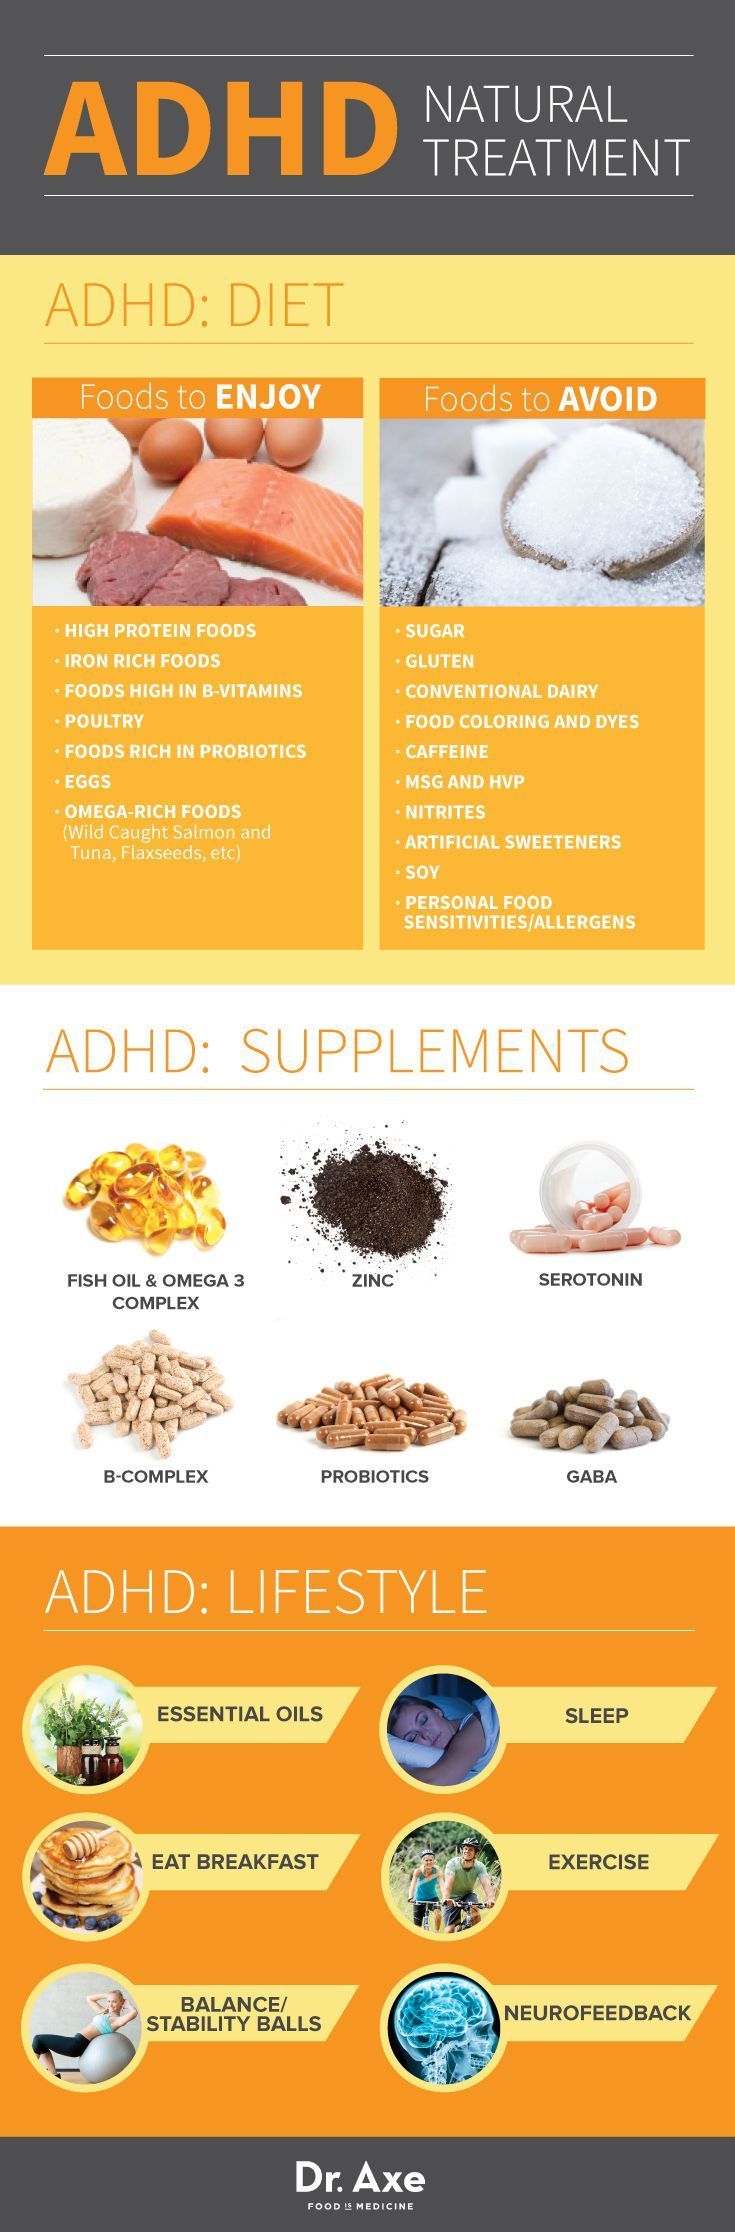 Adhd Diet For Adults